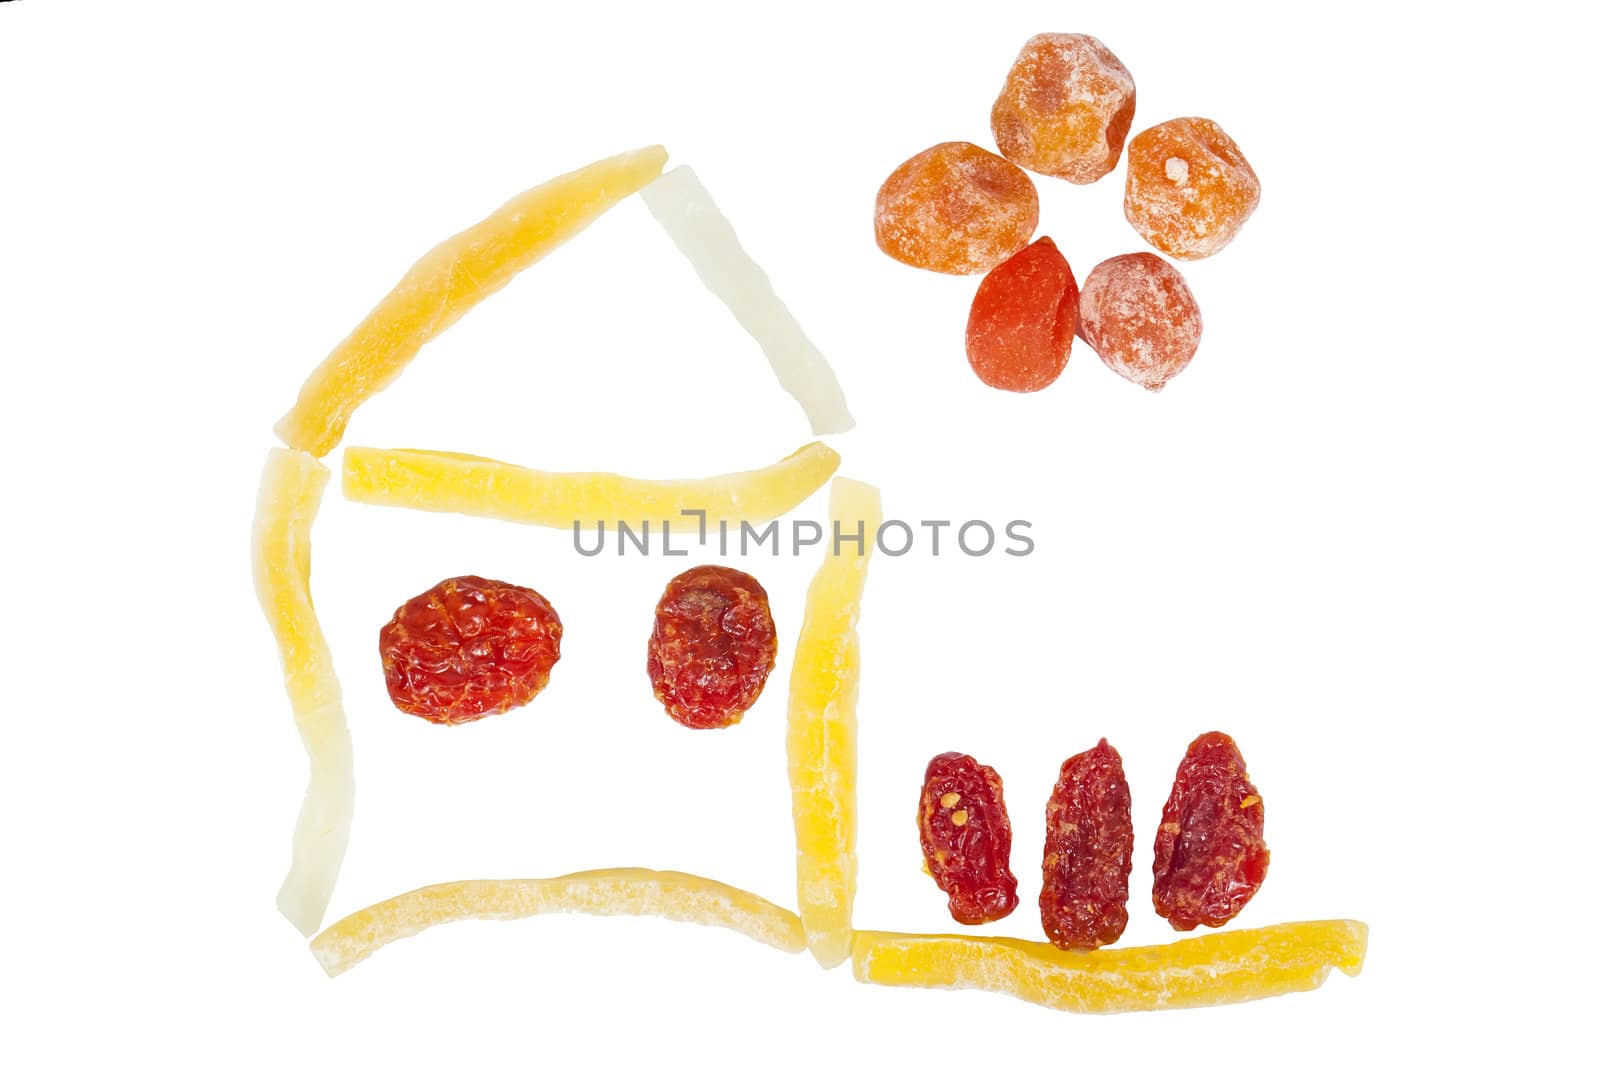 House figure made with dried fruits isolated on white